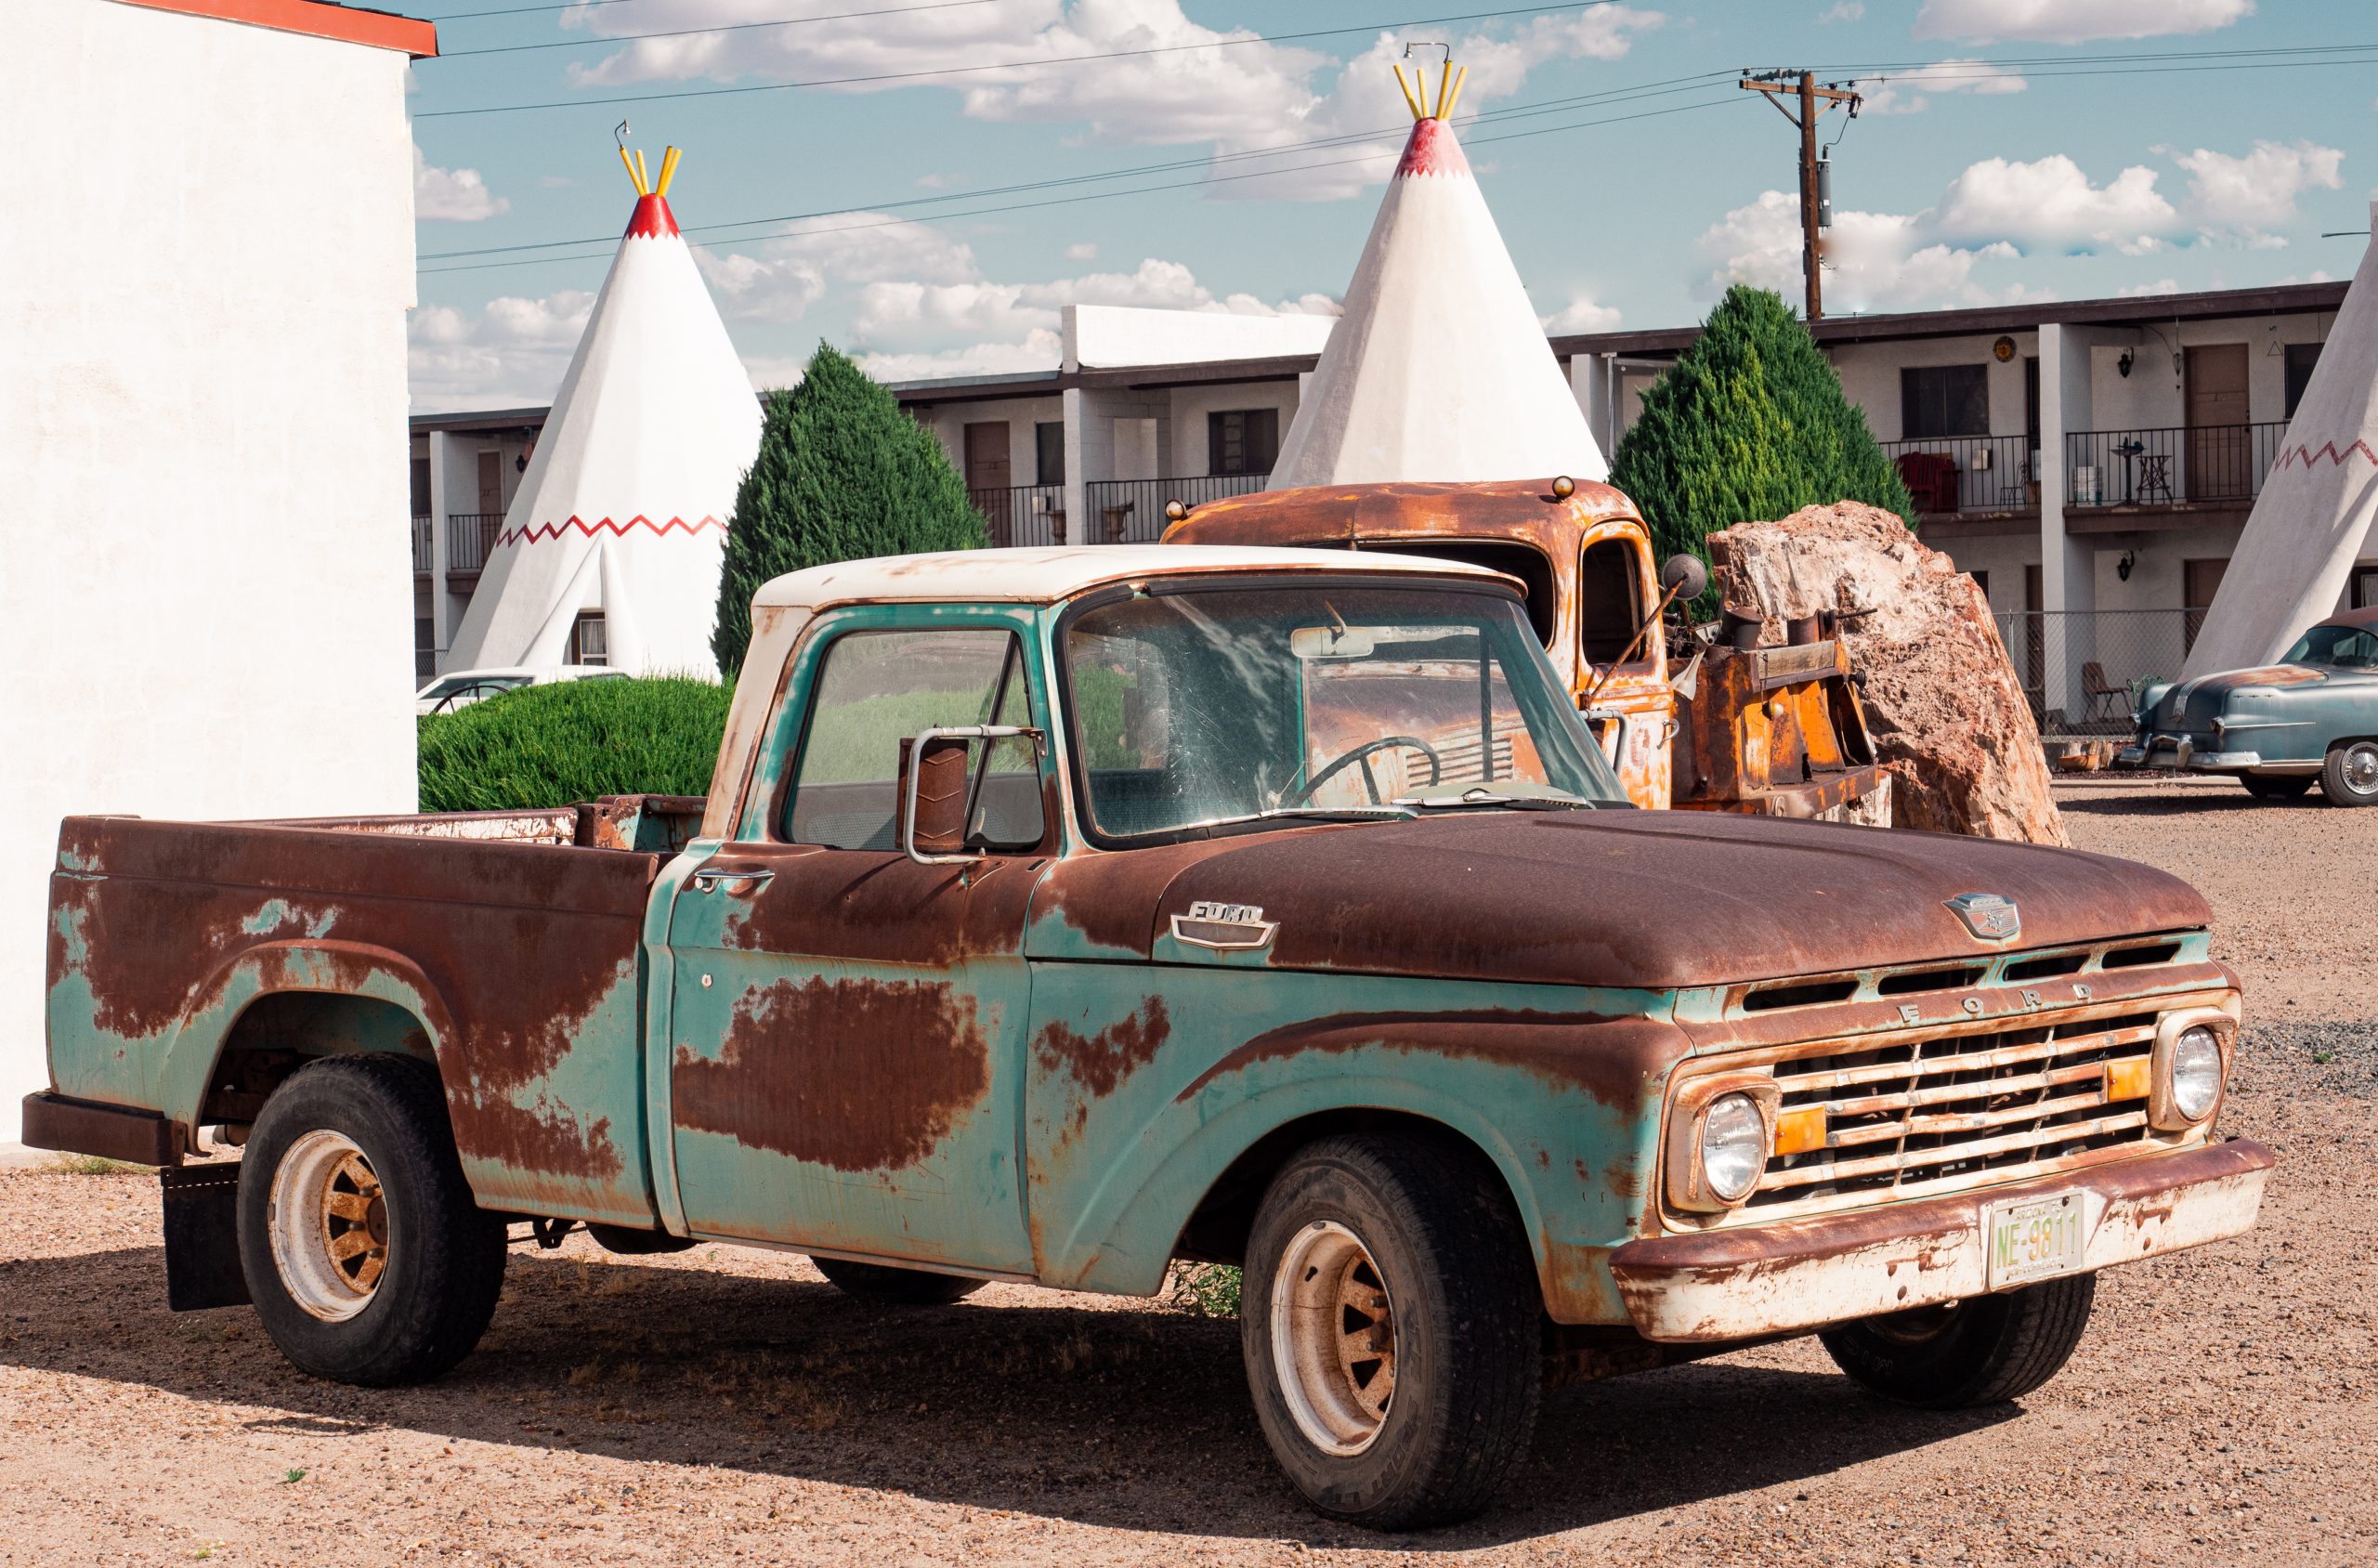 An old rusty car in front of a wigwam on Route 66 in Arizona